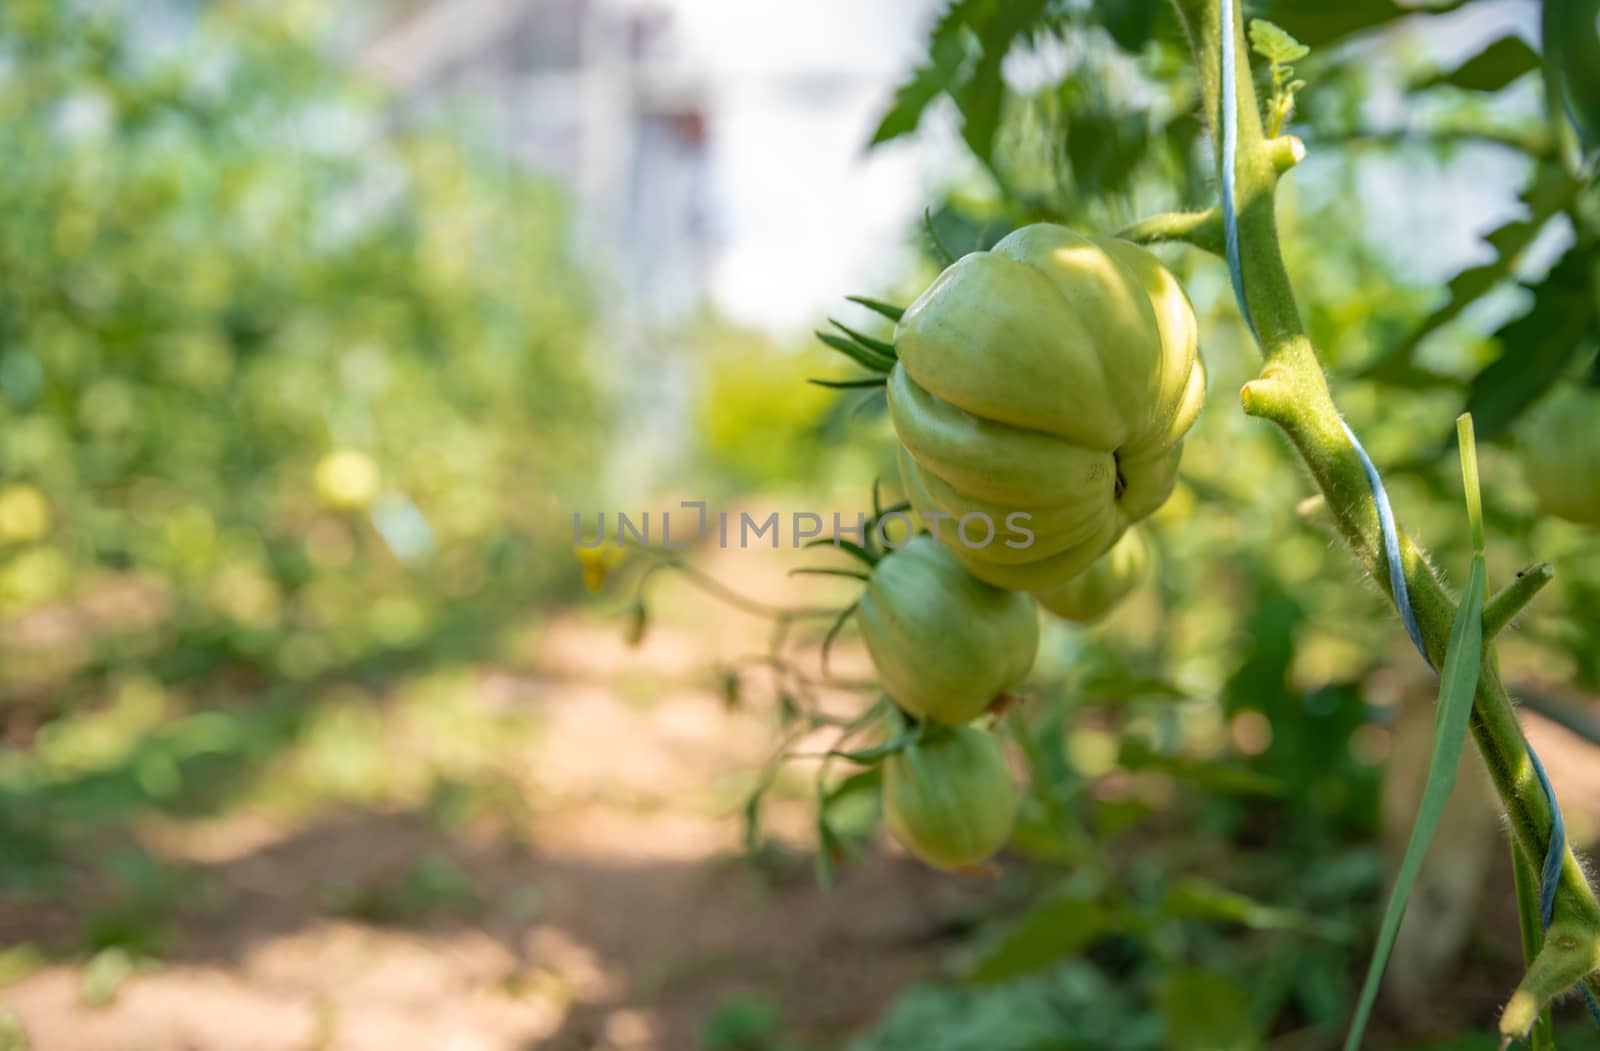 Organic green tomatoes ripen in a greenhouse. growing vegetables without chemicals, healthy food.